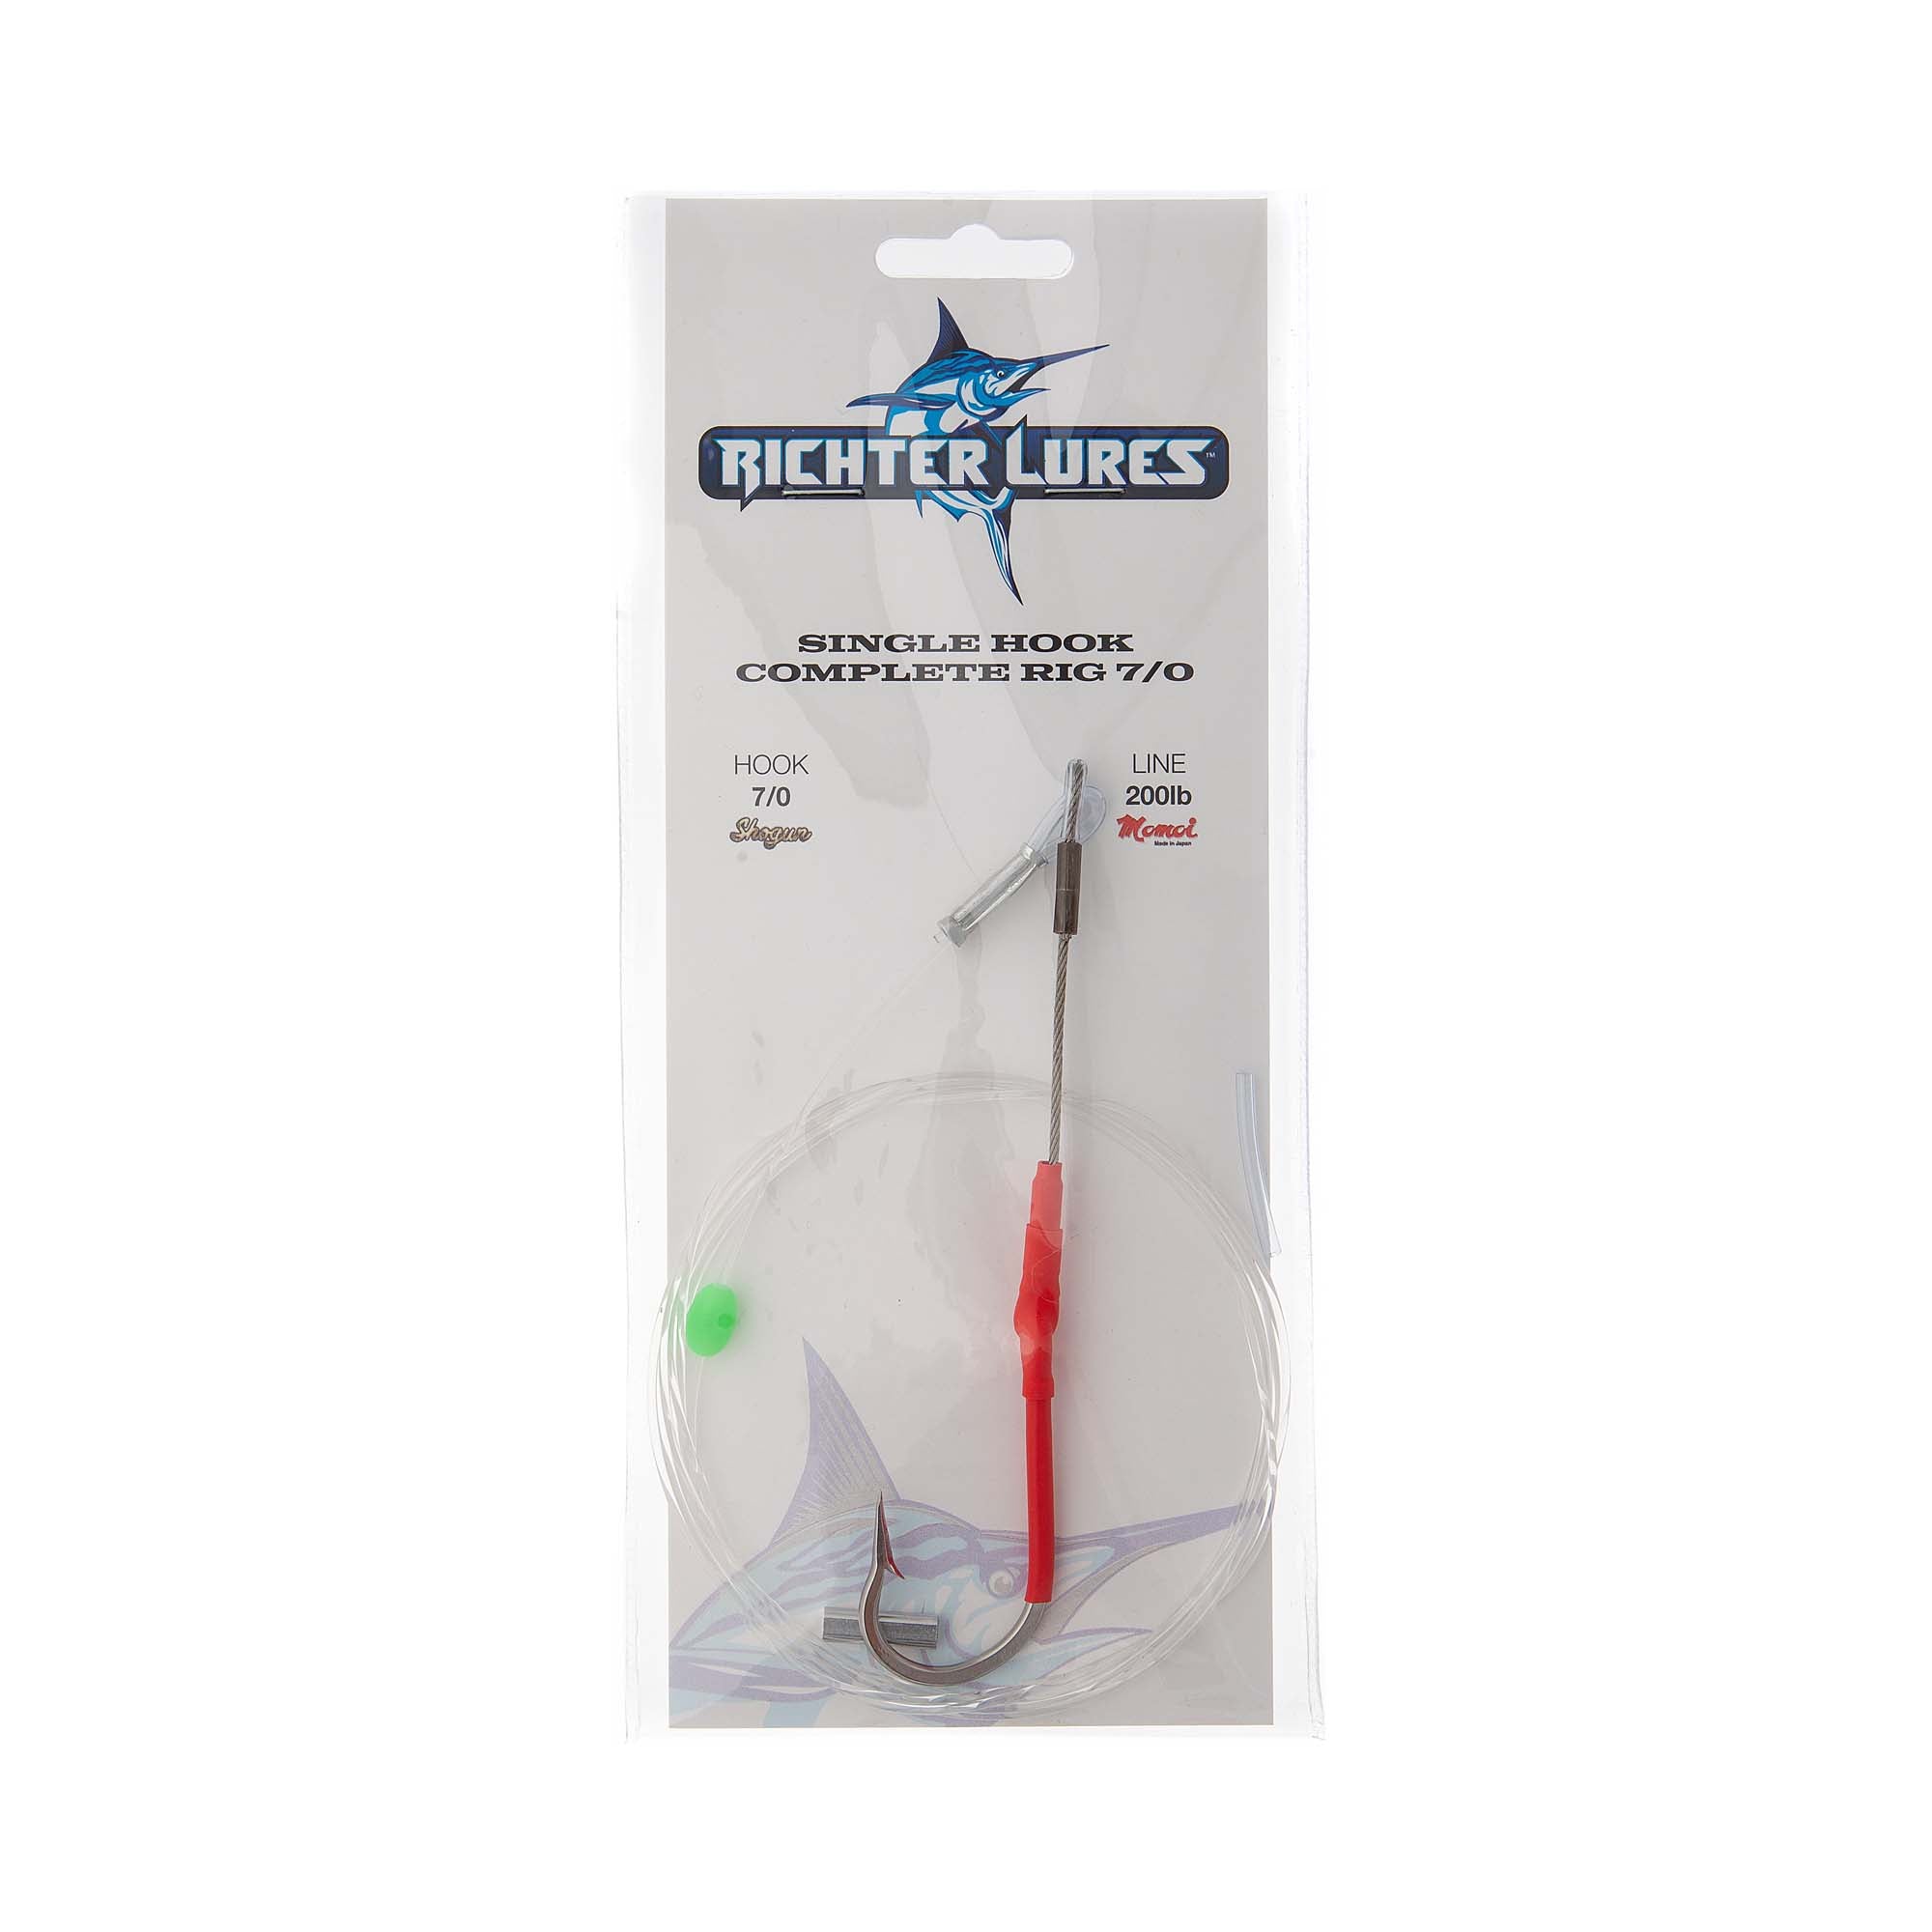 The Complete Single Hook Rig - Richter Lures